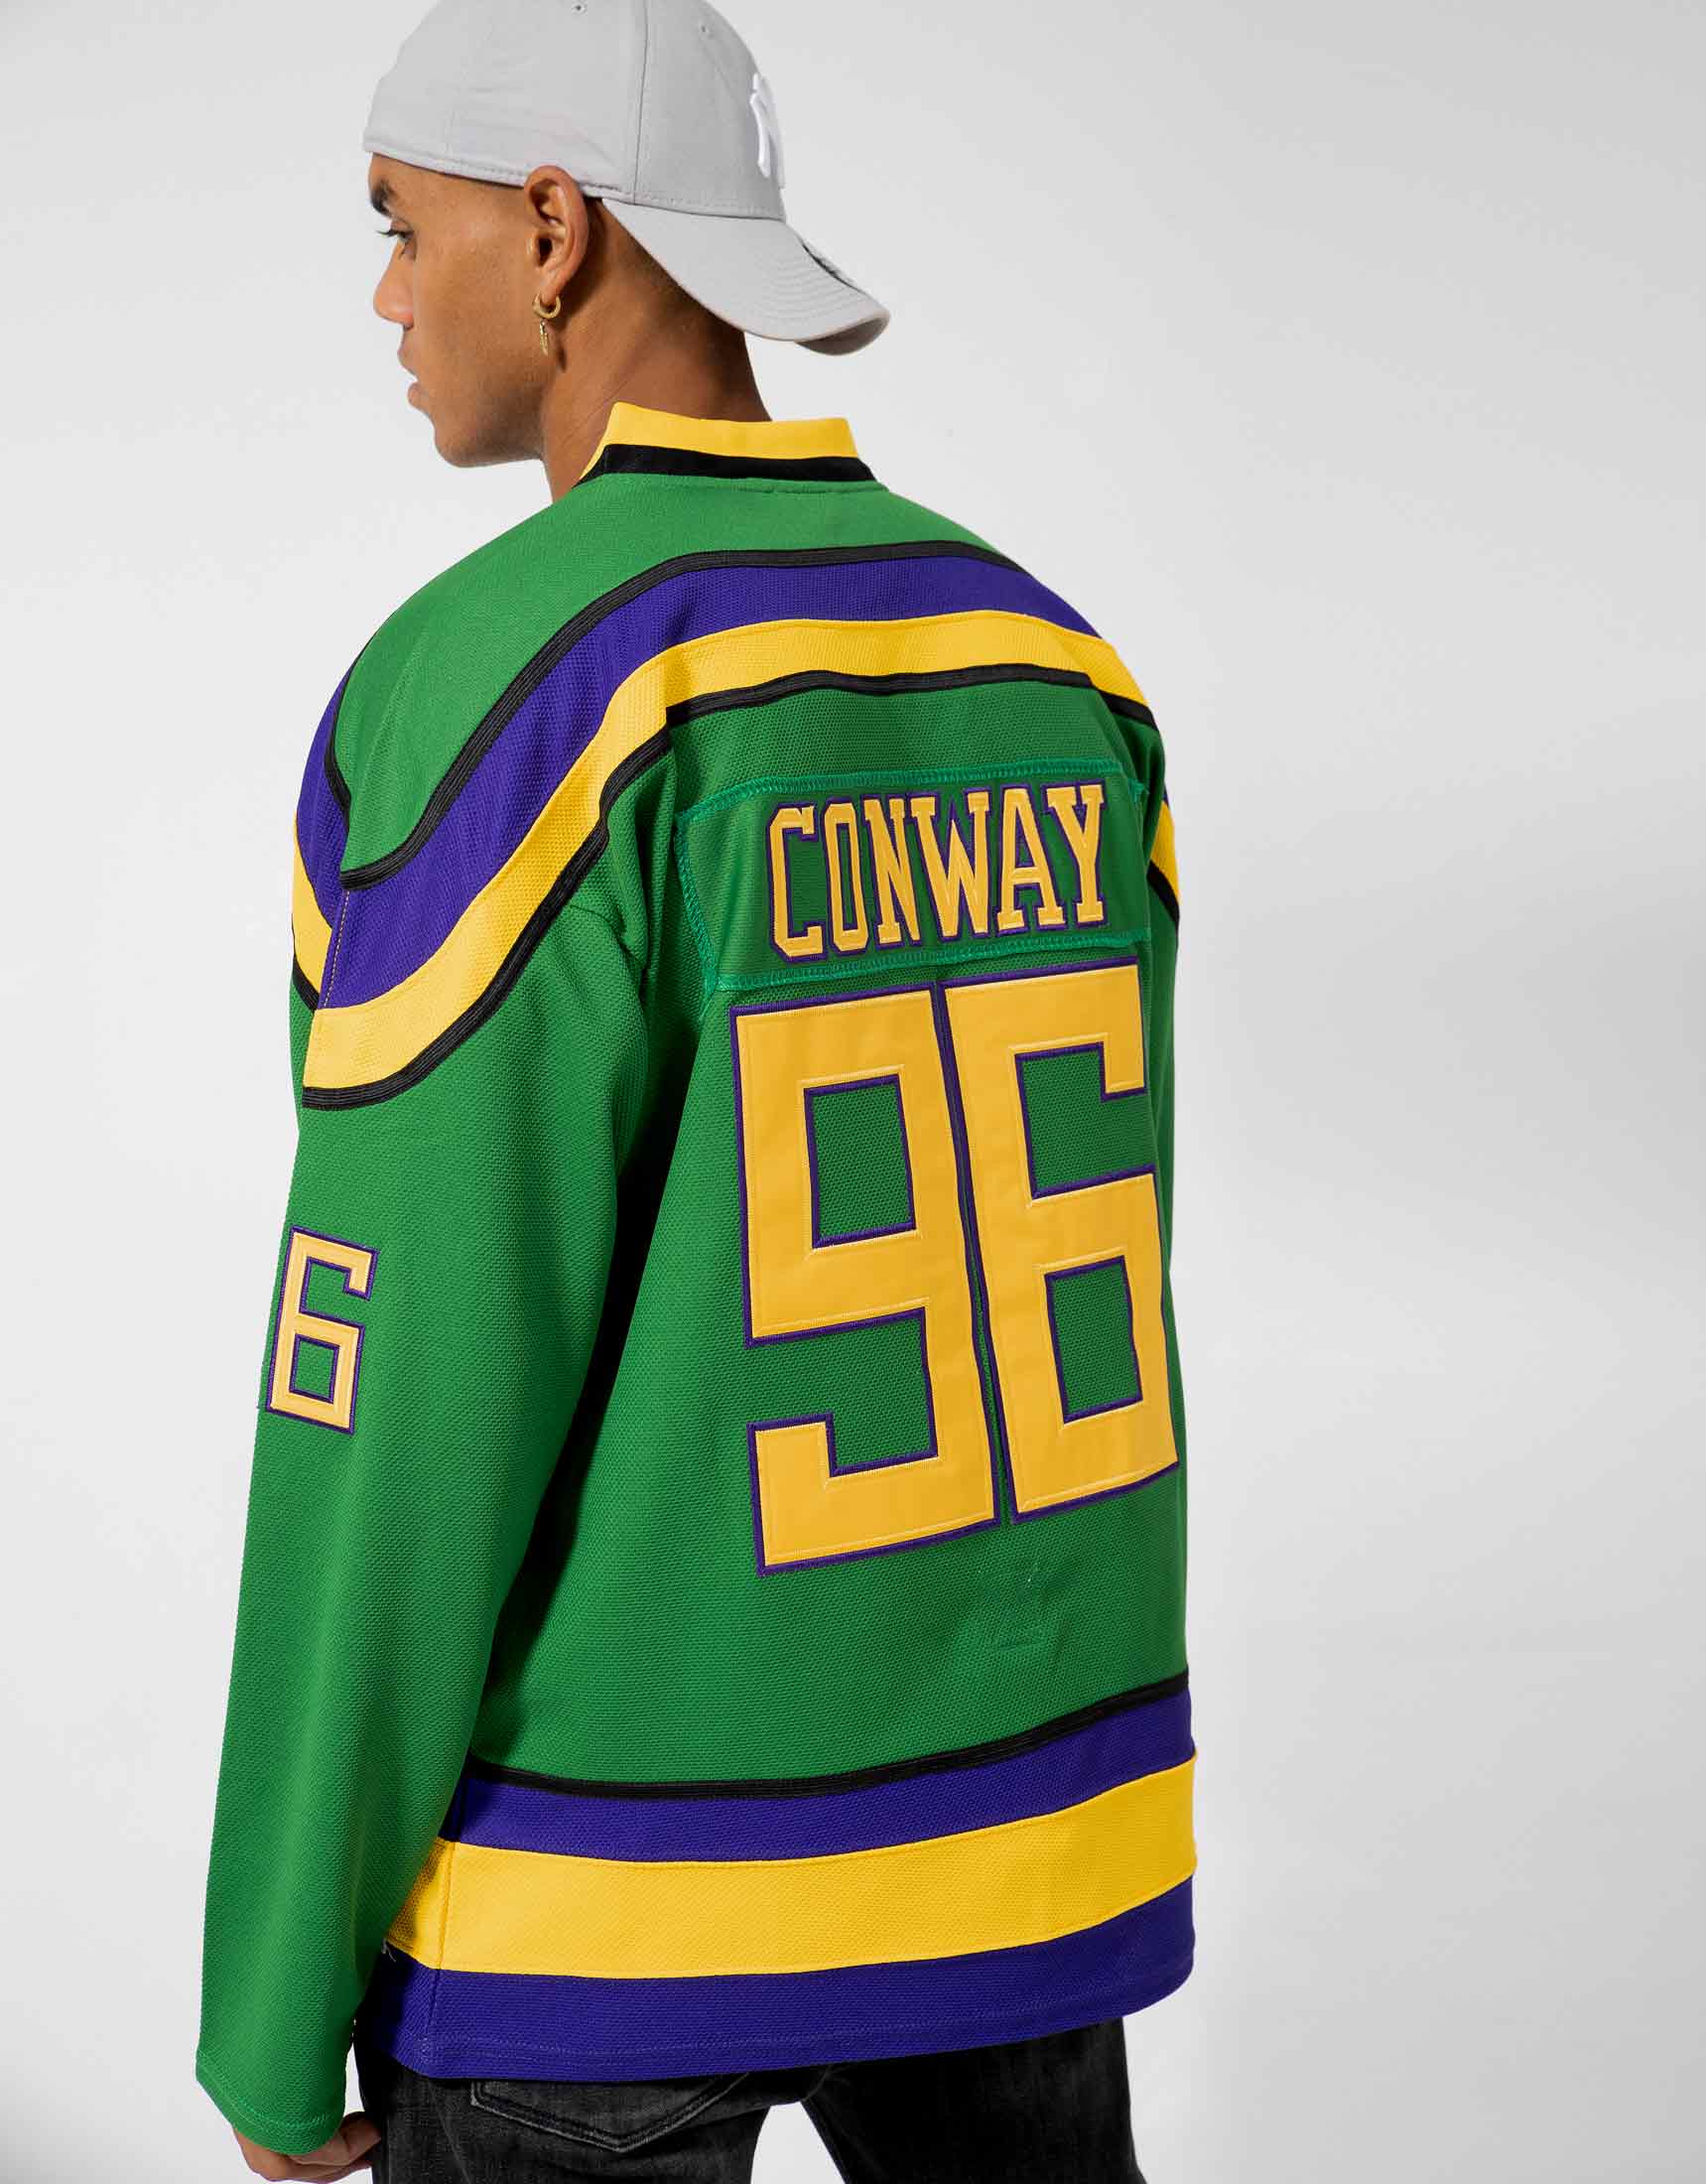 RENDONG Charlie Conway #96 Mighty Ducks Movie Ice Hockey Jersey Embroidered Practice Away Hockey Jersey M-3XL 